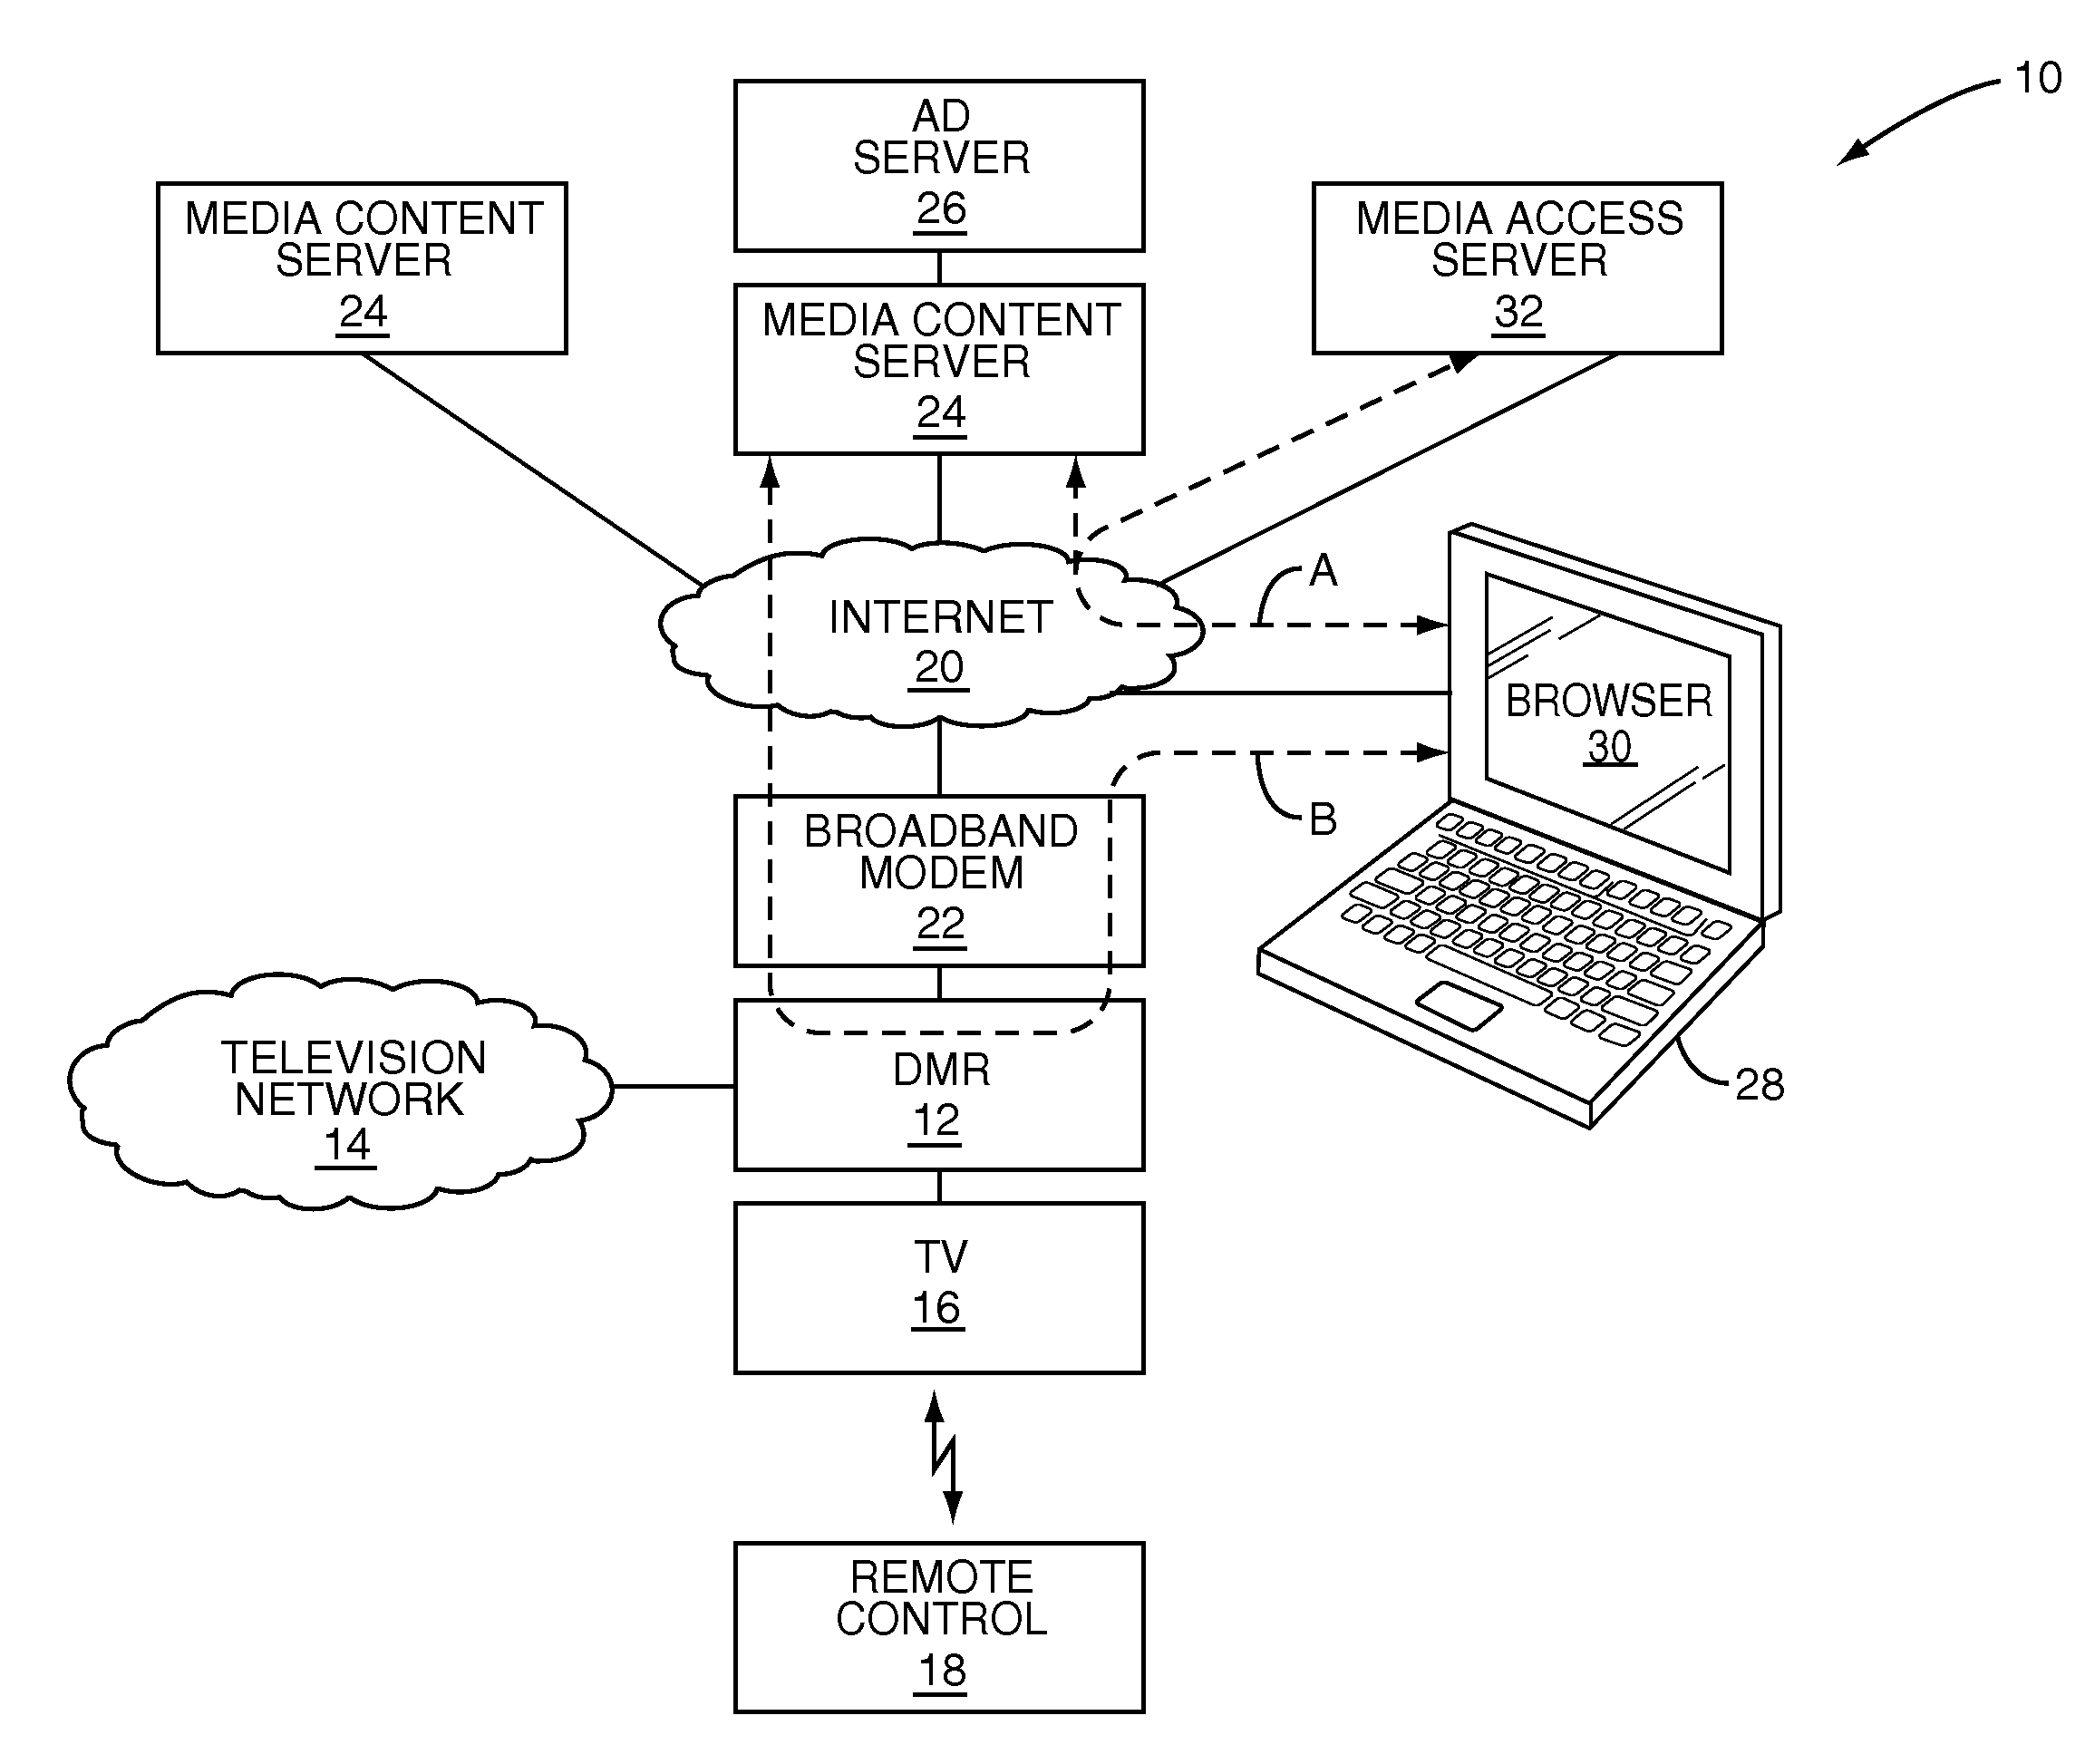 Remote control of media content delivery to a digital media recorder